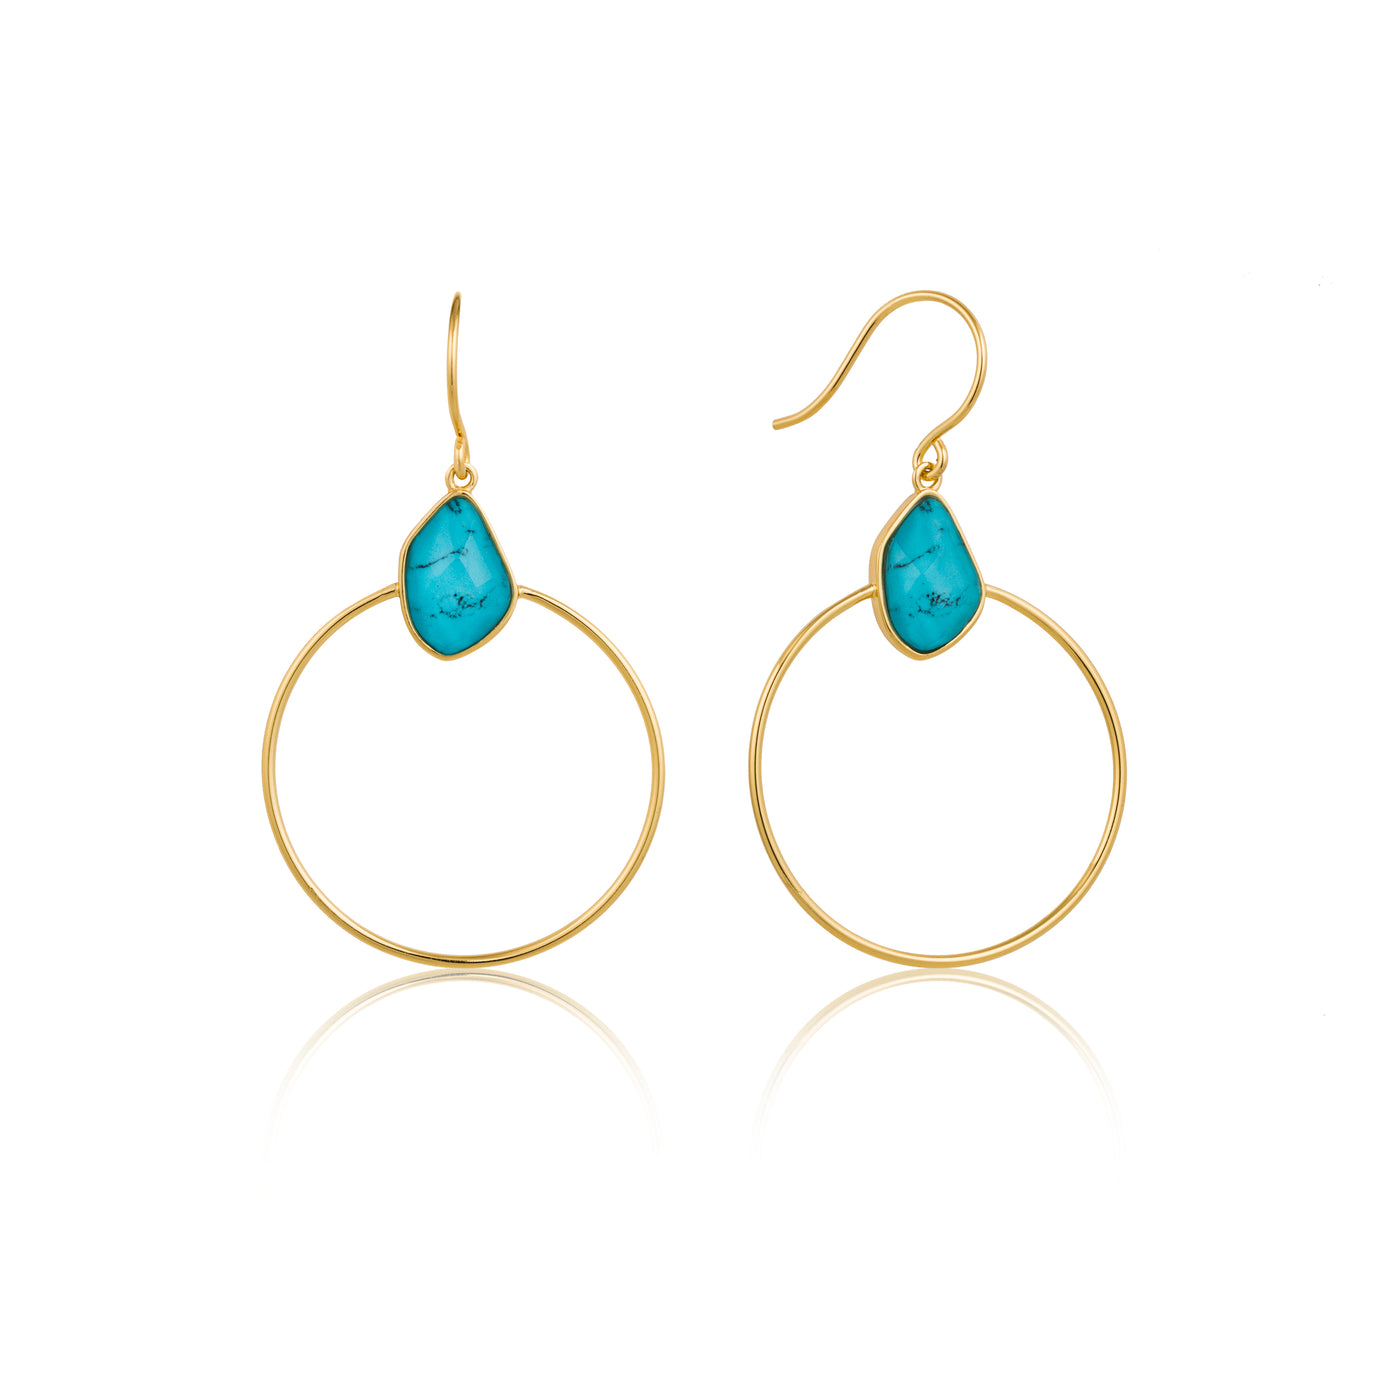 Ania Haie Turquoise Front Hoop Yellow Gold Earrings E014-02G